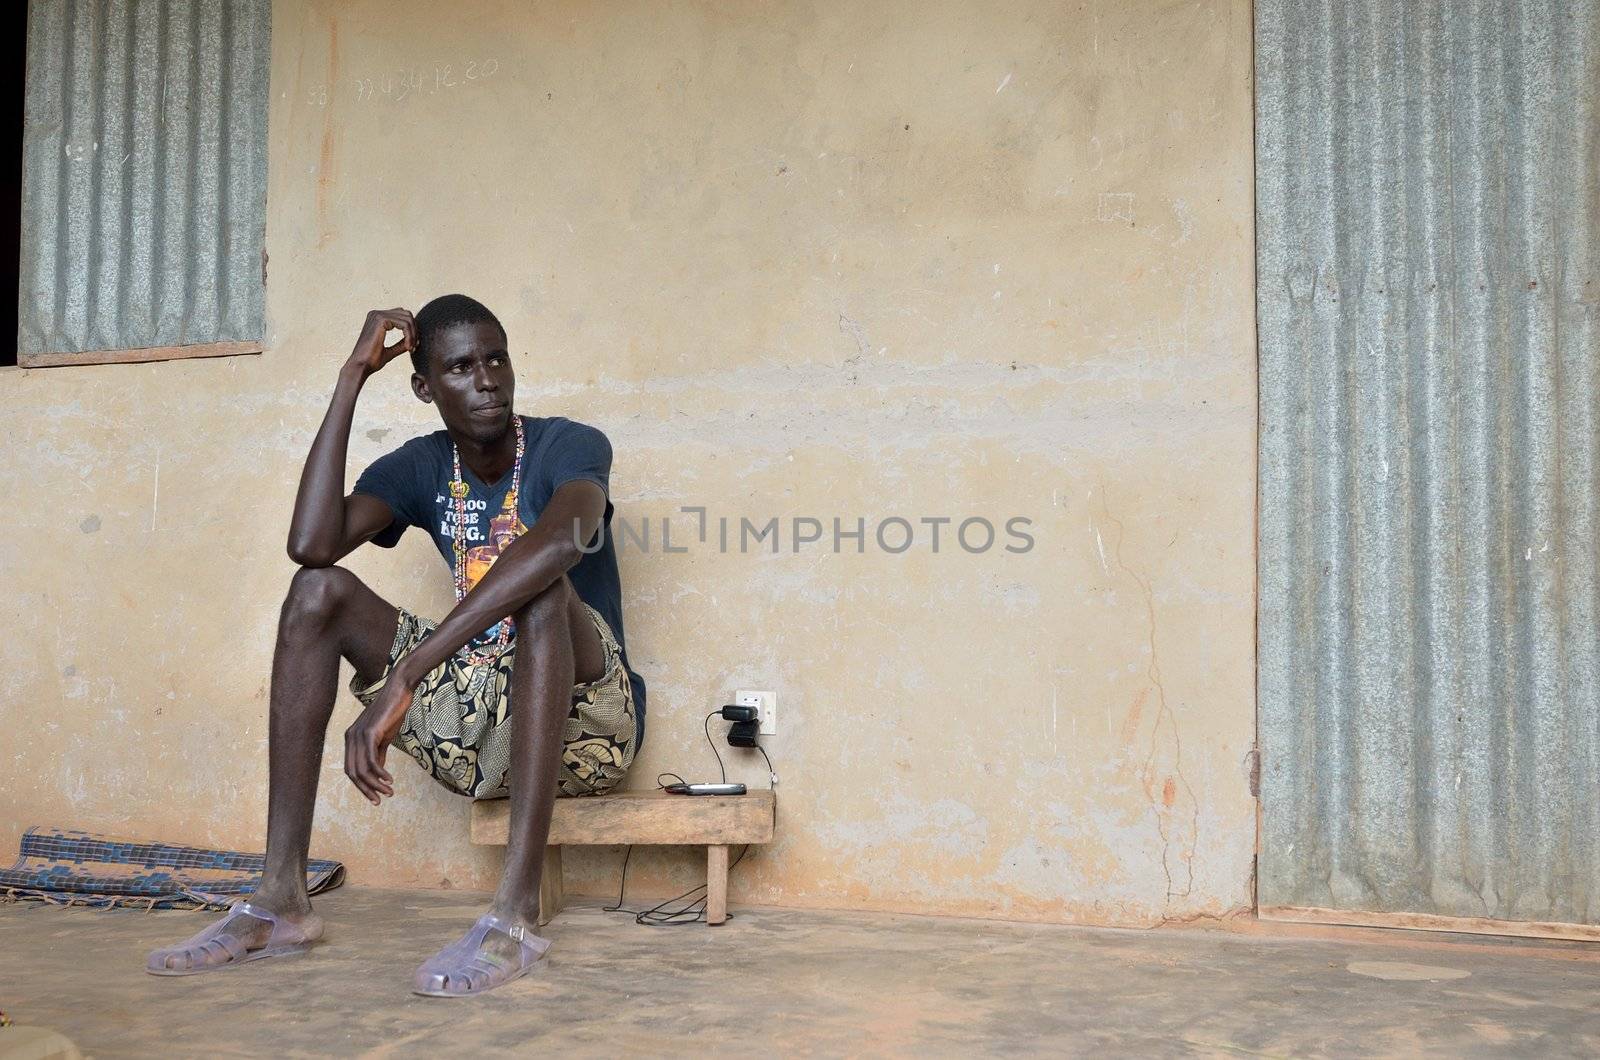 KARTIAK, SENEGAL - SEPT 18:Un adolescent African and not identified sat in the terrace, of his humble house, September 18 th 2012 in Kartiak, Senegal. The region of Casamance, south of Senegal is a very poor area according to International statistic